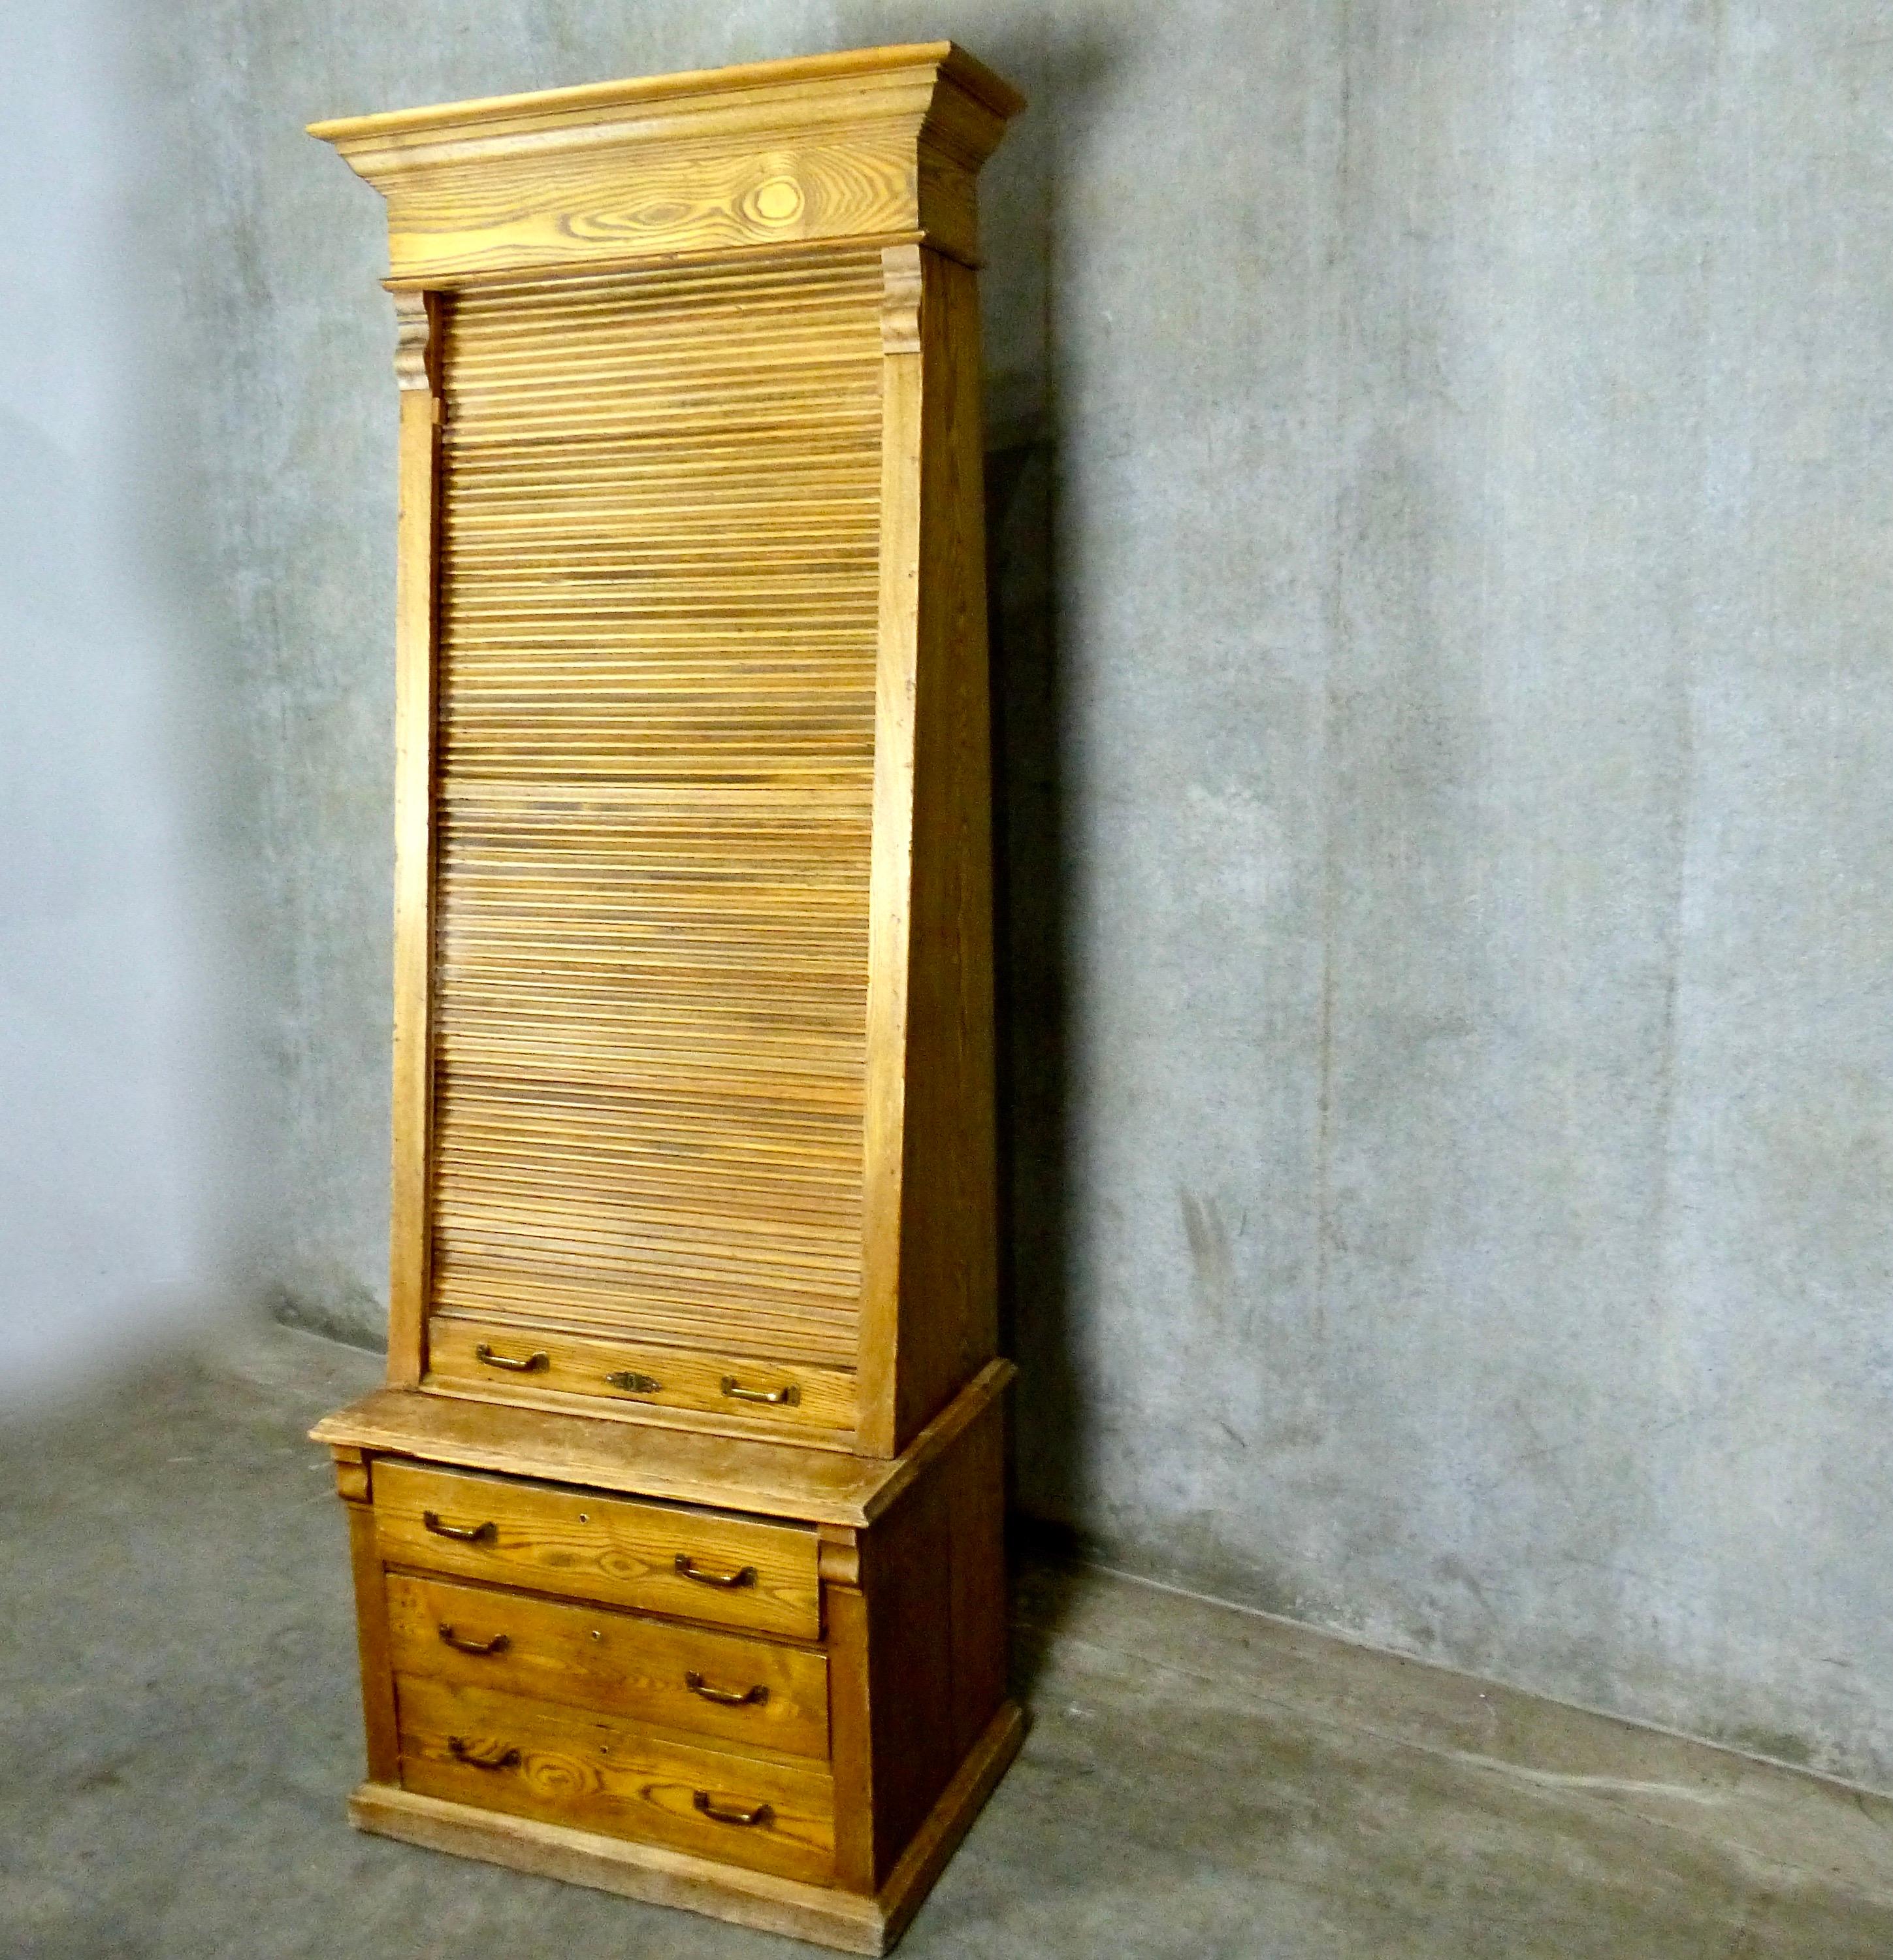 Railway ticket cabinet in solid oak with a unique roll down/tambour cover. Made by Poole Brothers in the USA in the 1920s-1930s. Multiple shelves plus three lower drawers with original brass hardware. Recently acquired from a private